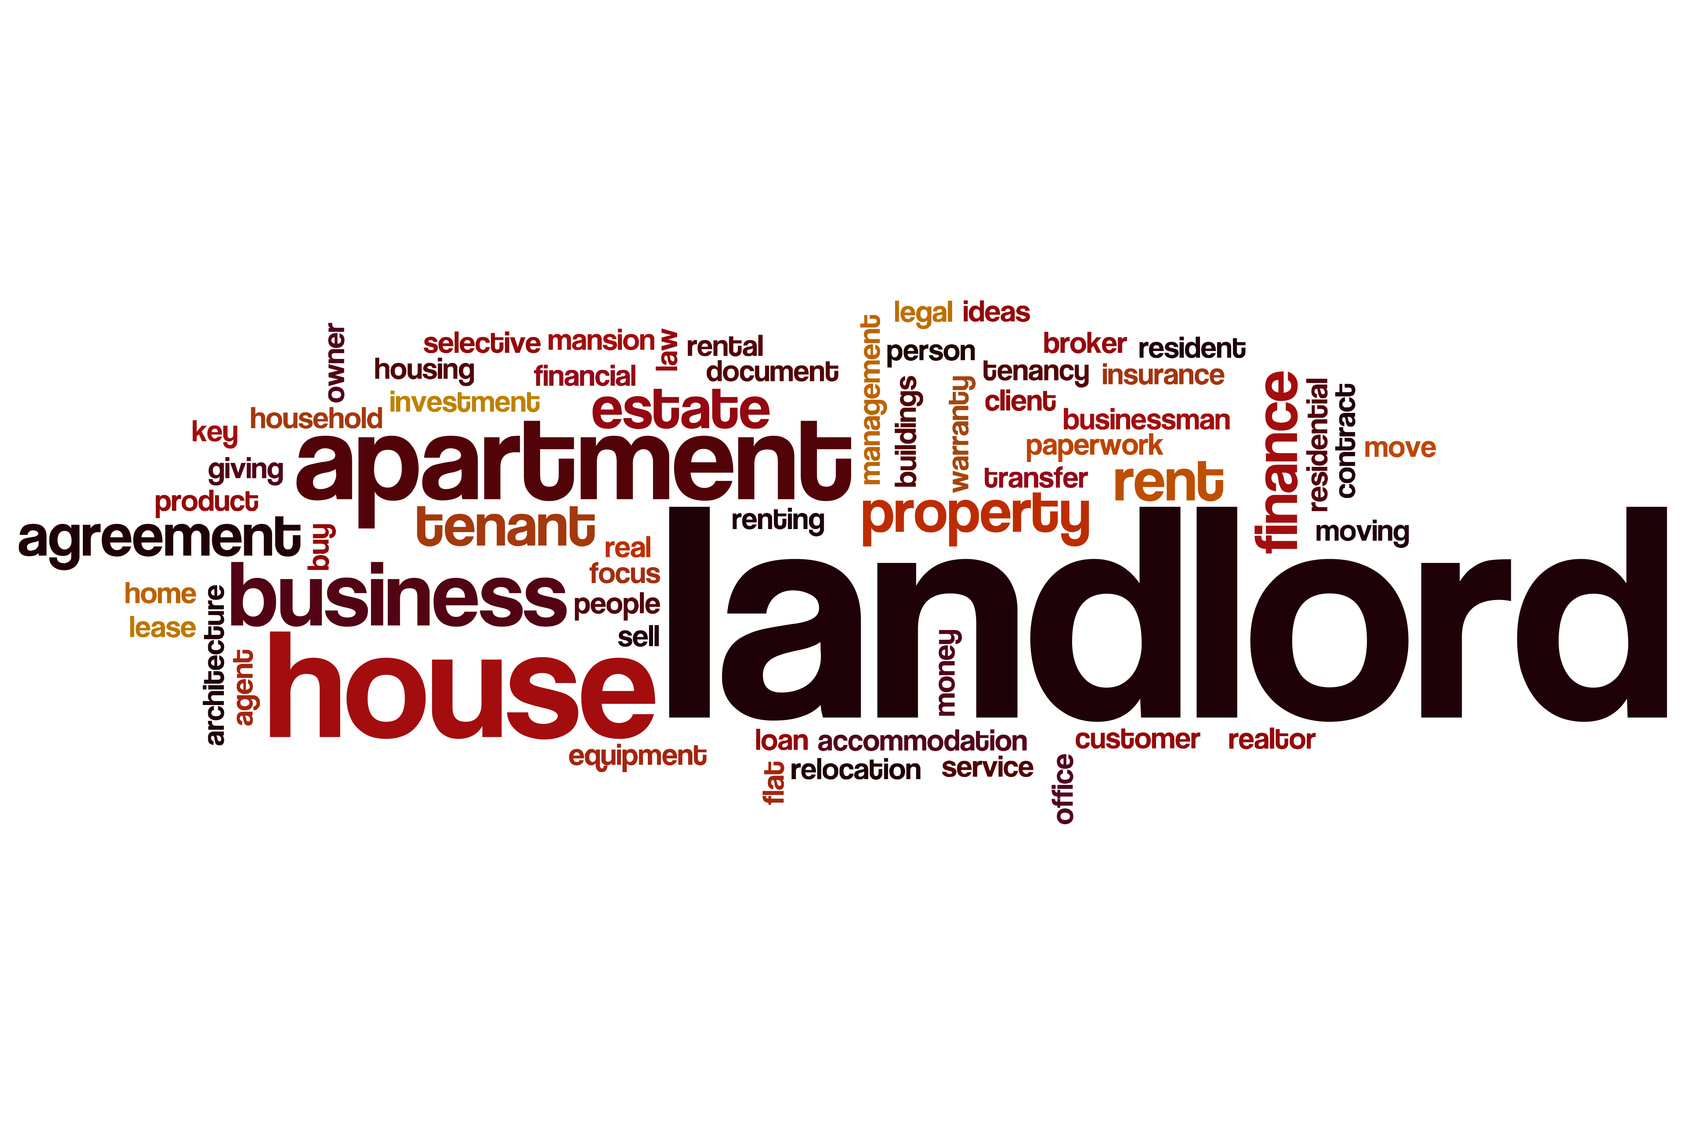 Why Do So Many Landlords Not Accept Dss Local Housing Allowance